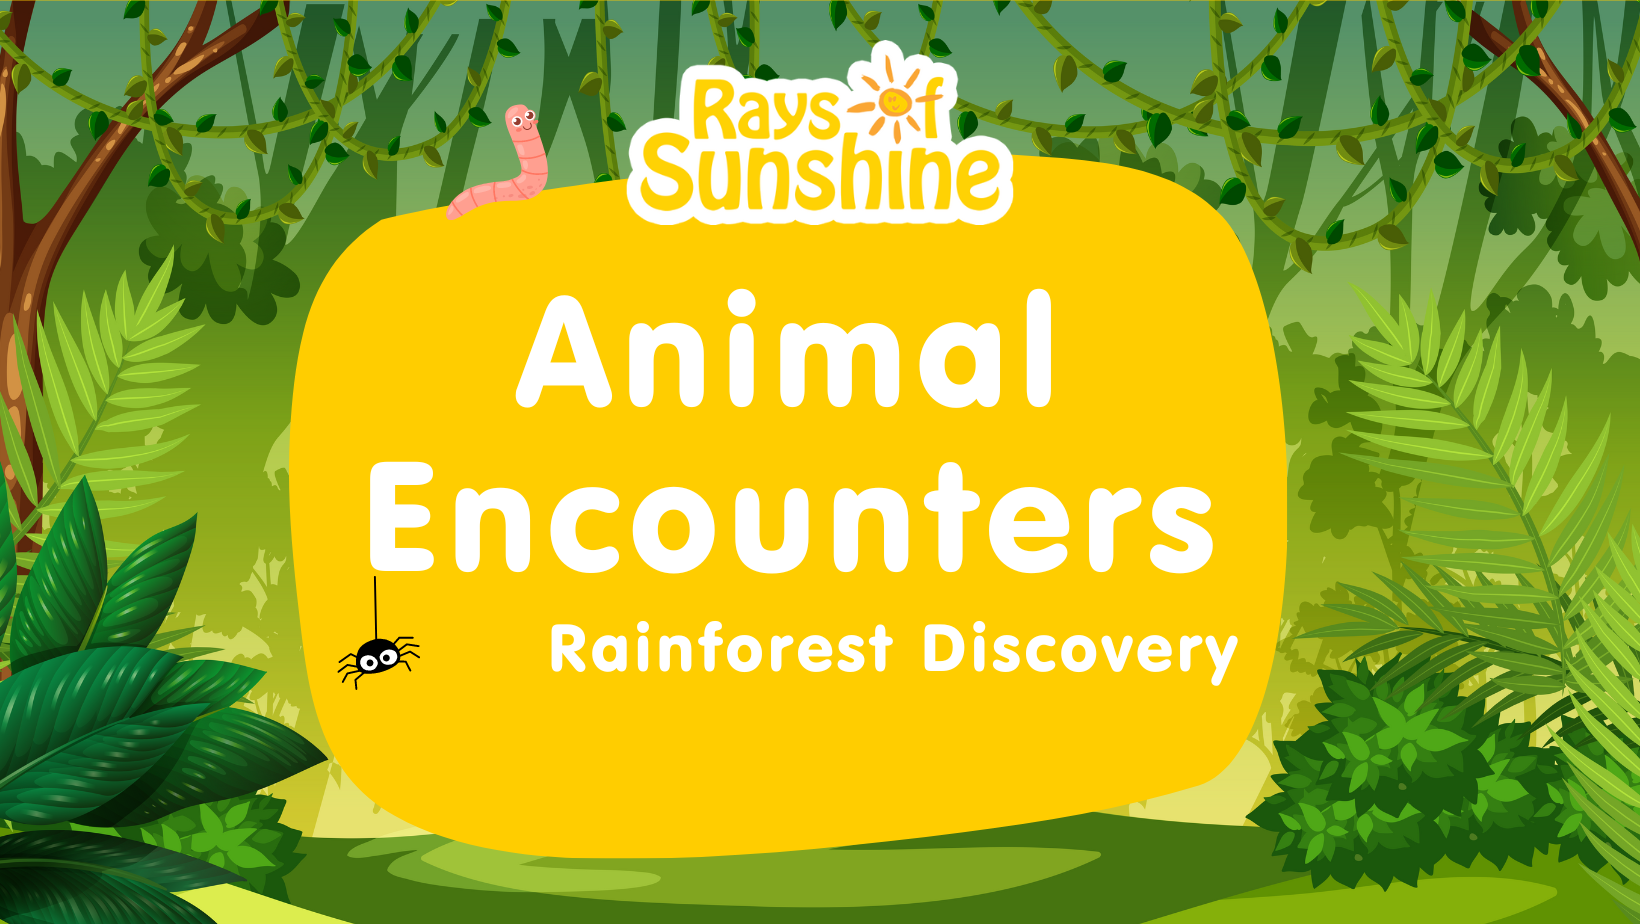 Animal Encounters ‘Rainforest Discovery’